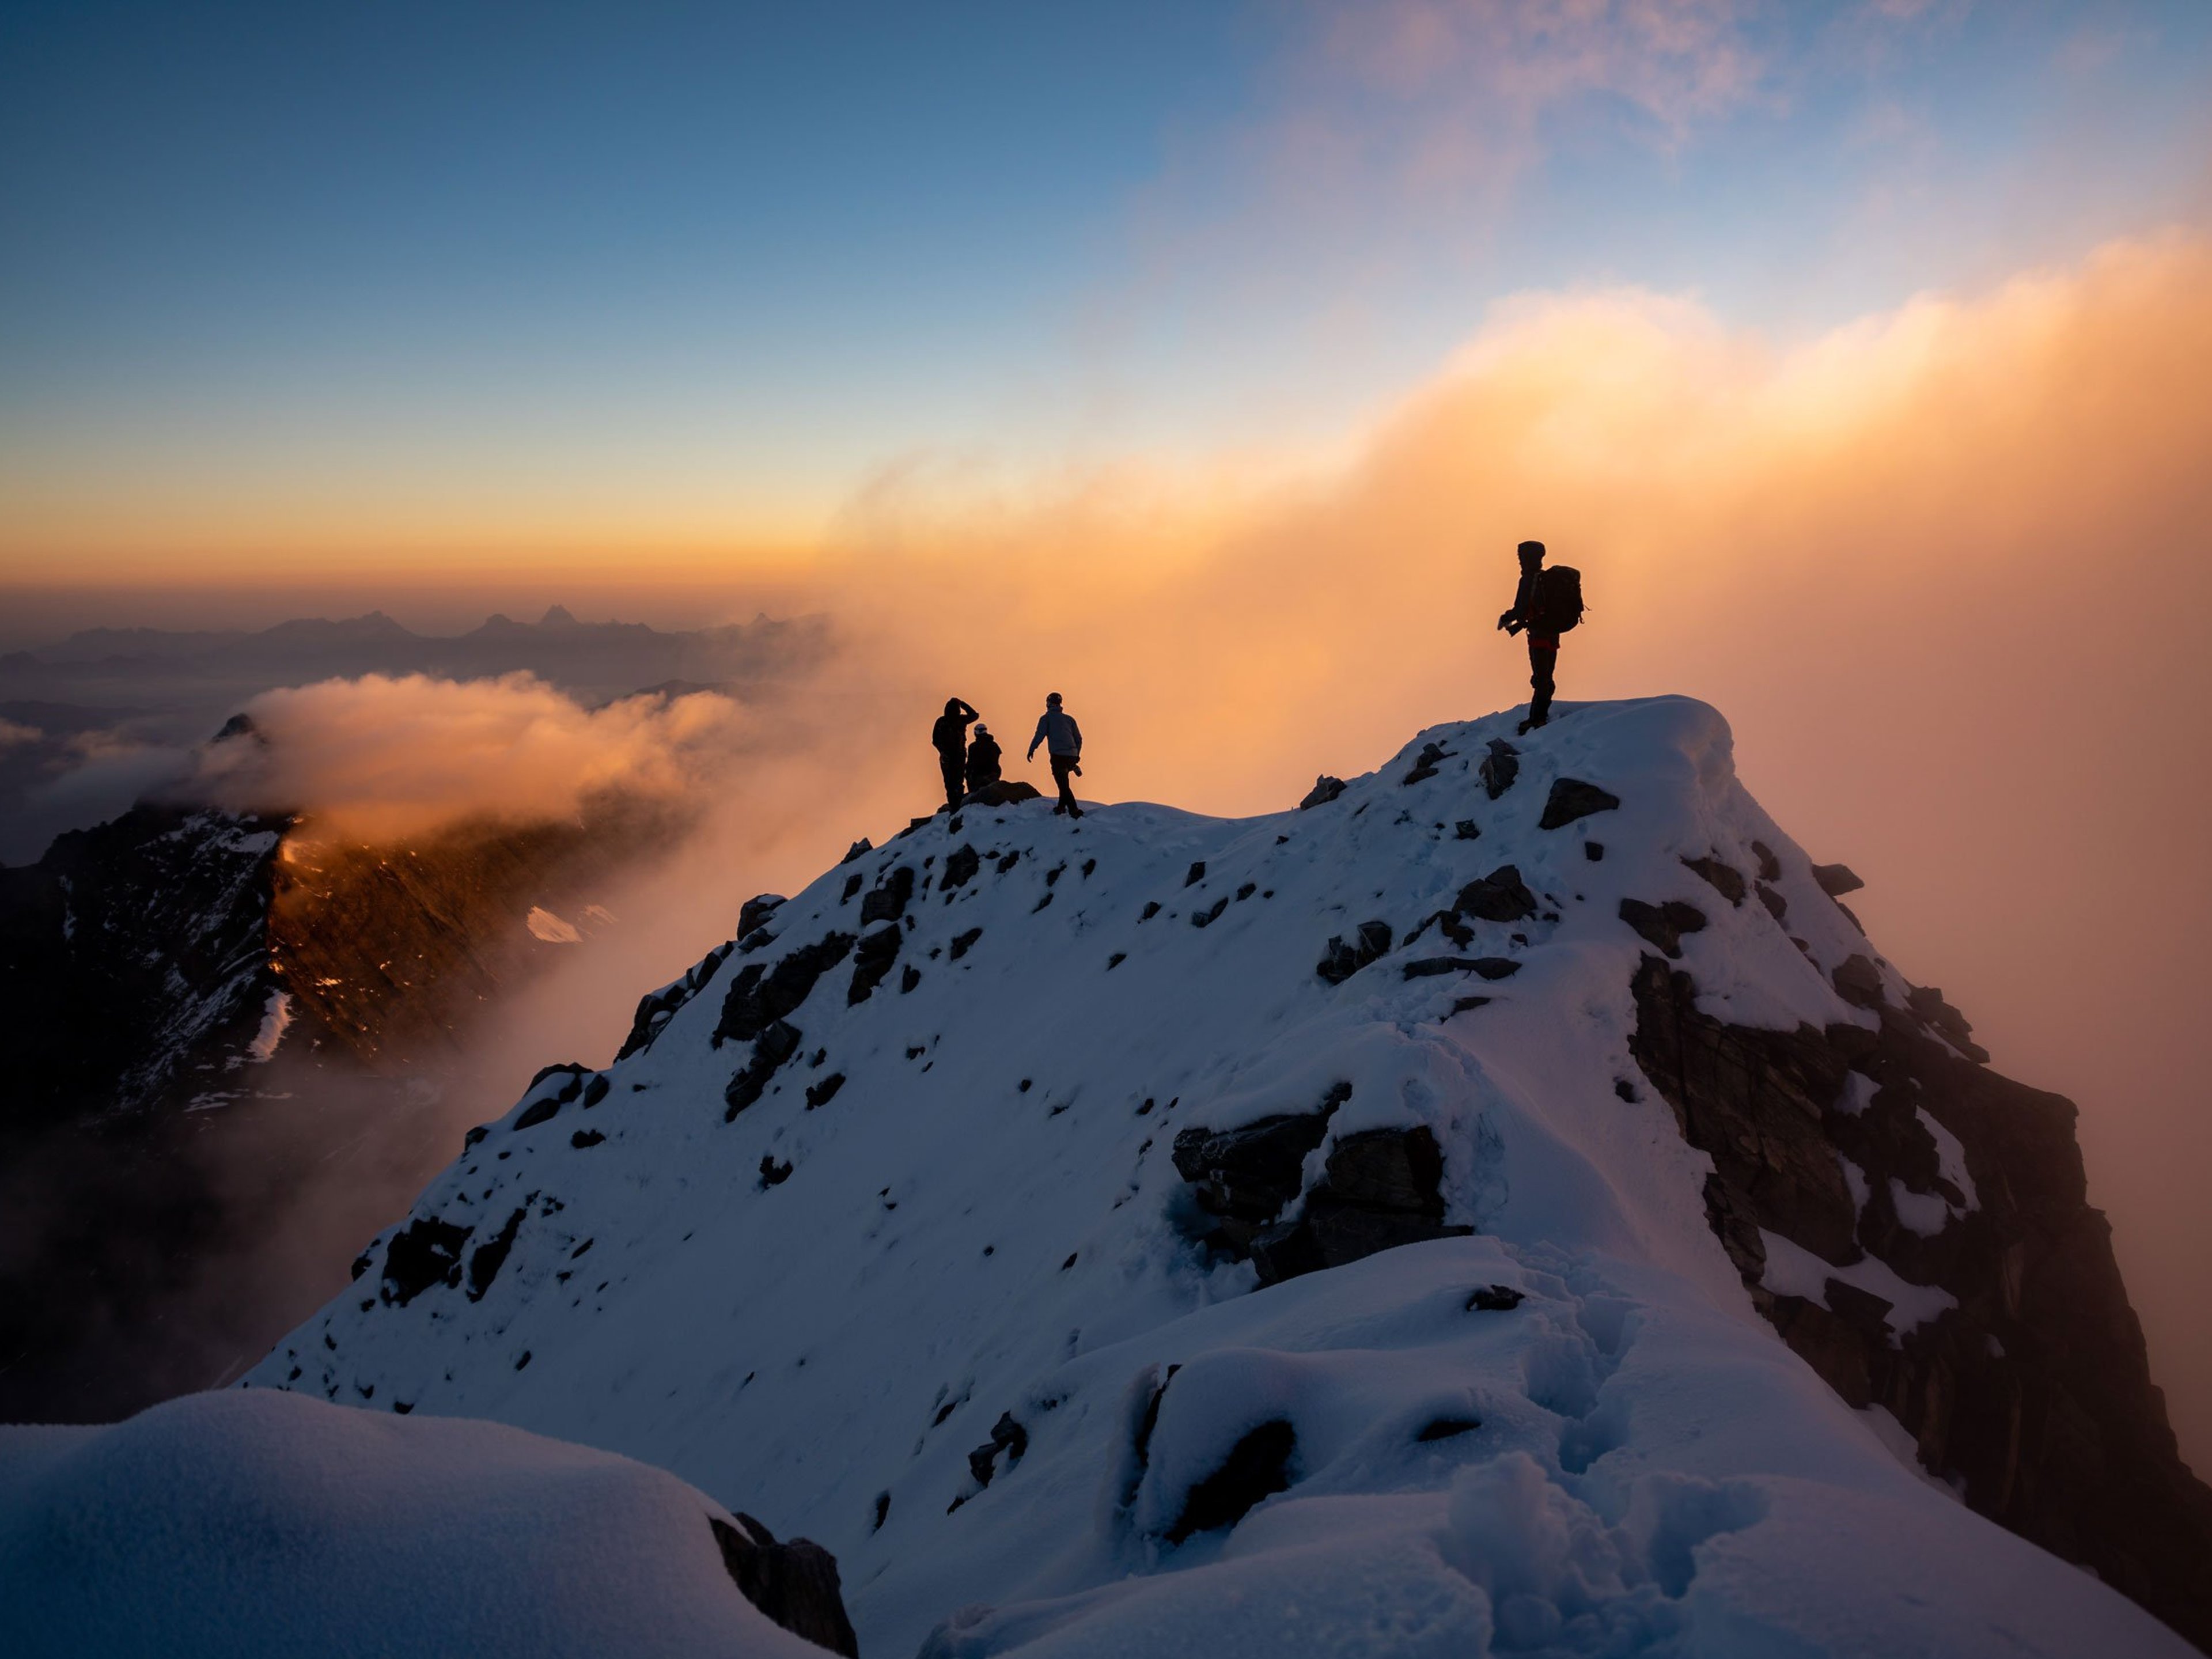 The sillouettes of four climbers at the summit of a snowy mountaintop at sunset.